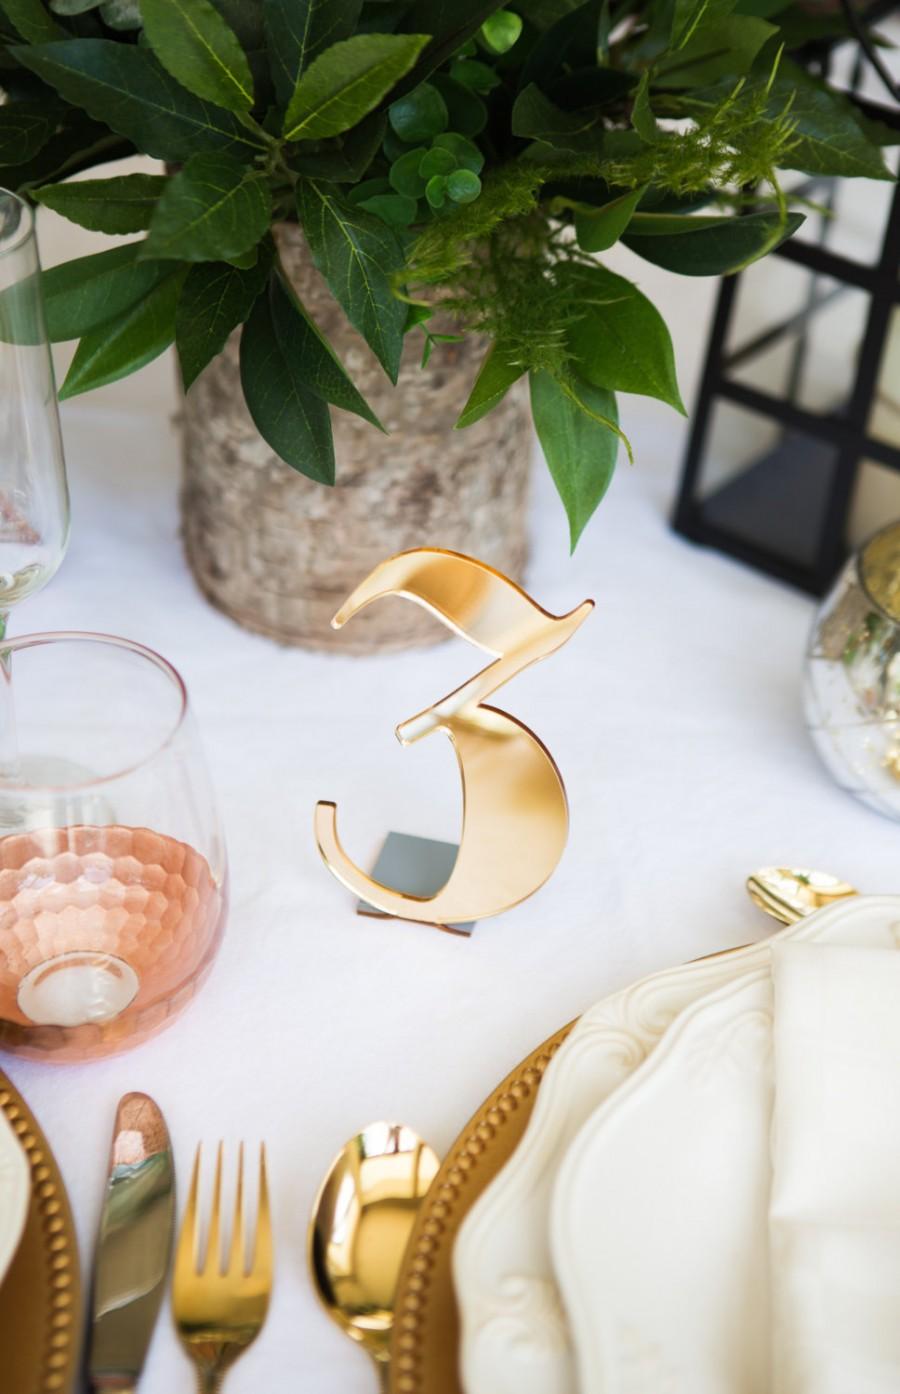 Hochzeit - Acrylic Table Numbers for Weddings and Events - Standing Numbers Gold, Silver, Clear Acrylic Chic Wedding Decor Centerpieces (Item - ACB100)